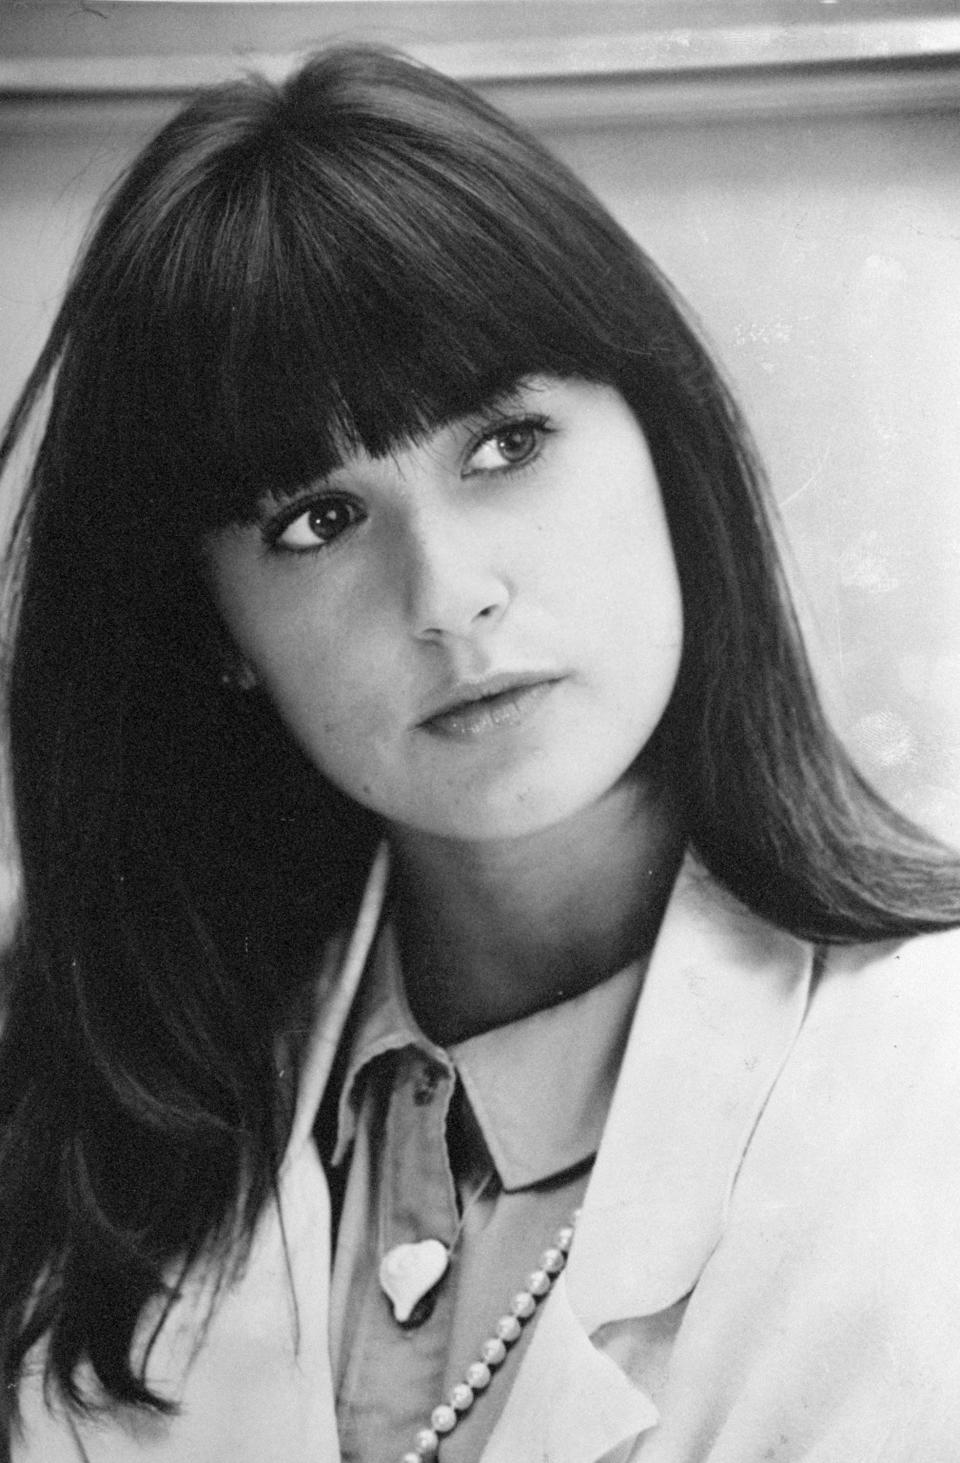 In honor of her 56th birthday, here is a look back at Demi Moore's best beauty moments, from her bowl cut to her shaved head.